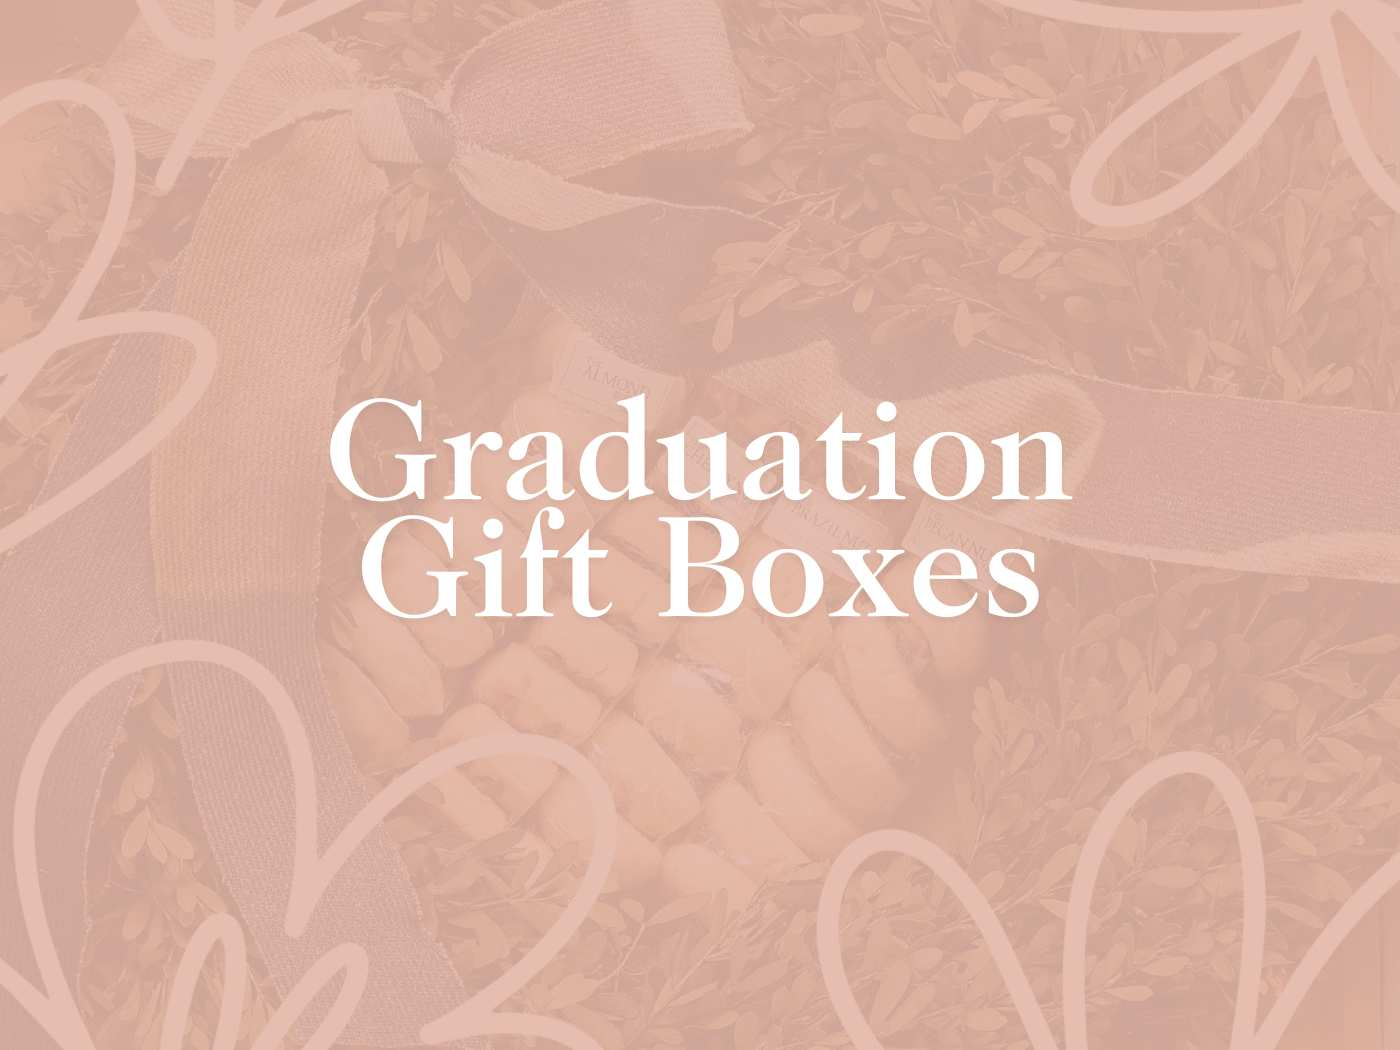 Elegant promotional image for 'Graduation Gift Boxes' and graduation gift ideas with a soft pink floral background and a decorative ribbon, offering a heartfelt and bespoke gifting solution by Fabulous Flowers and Gifts.